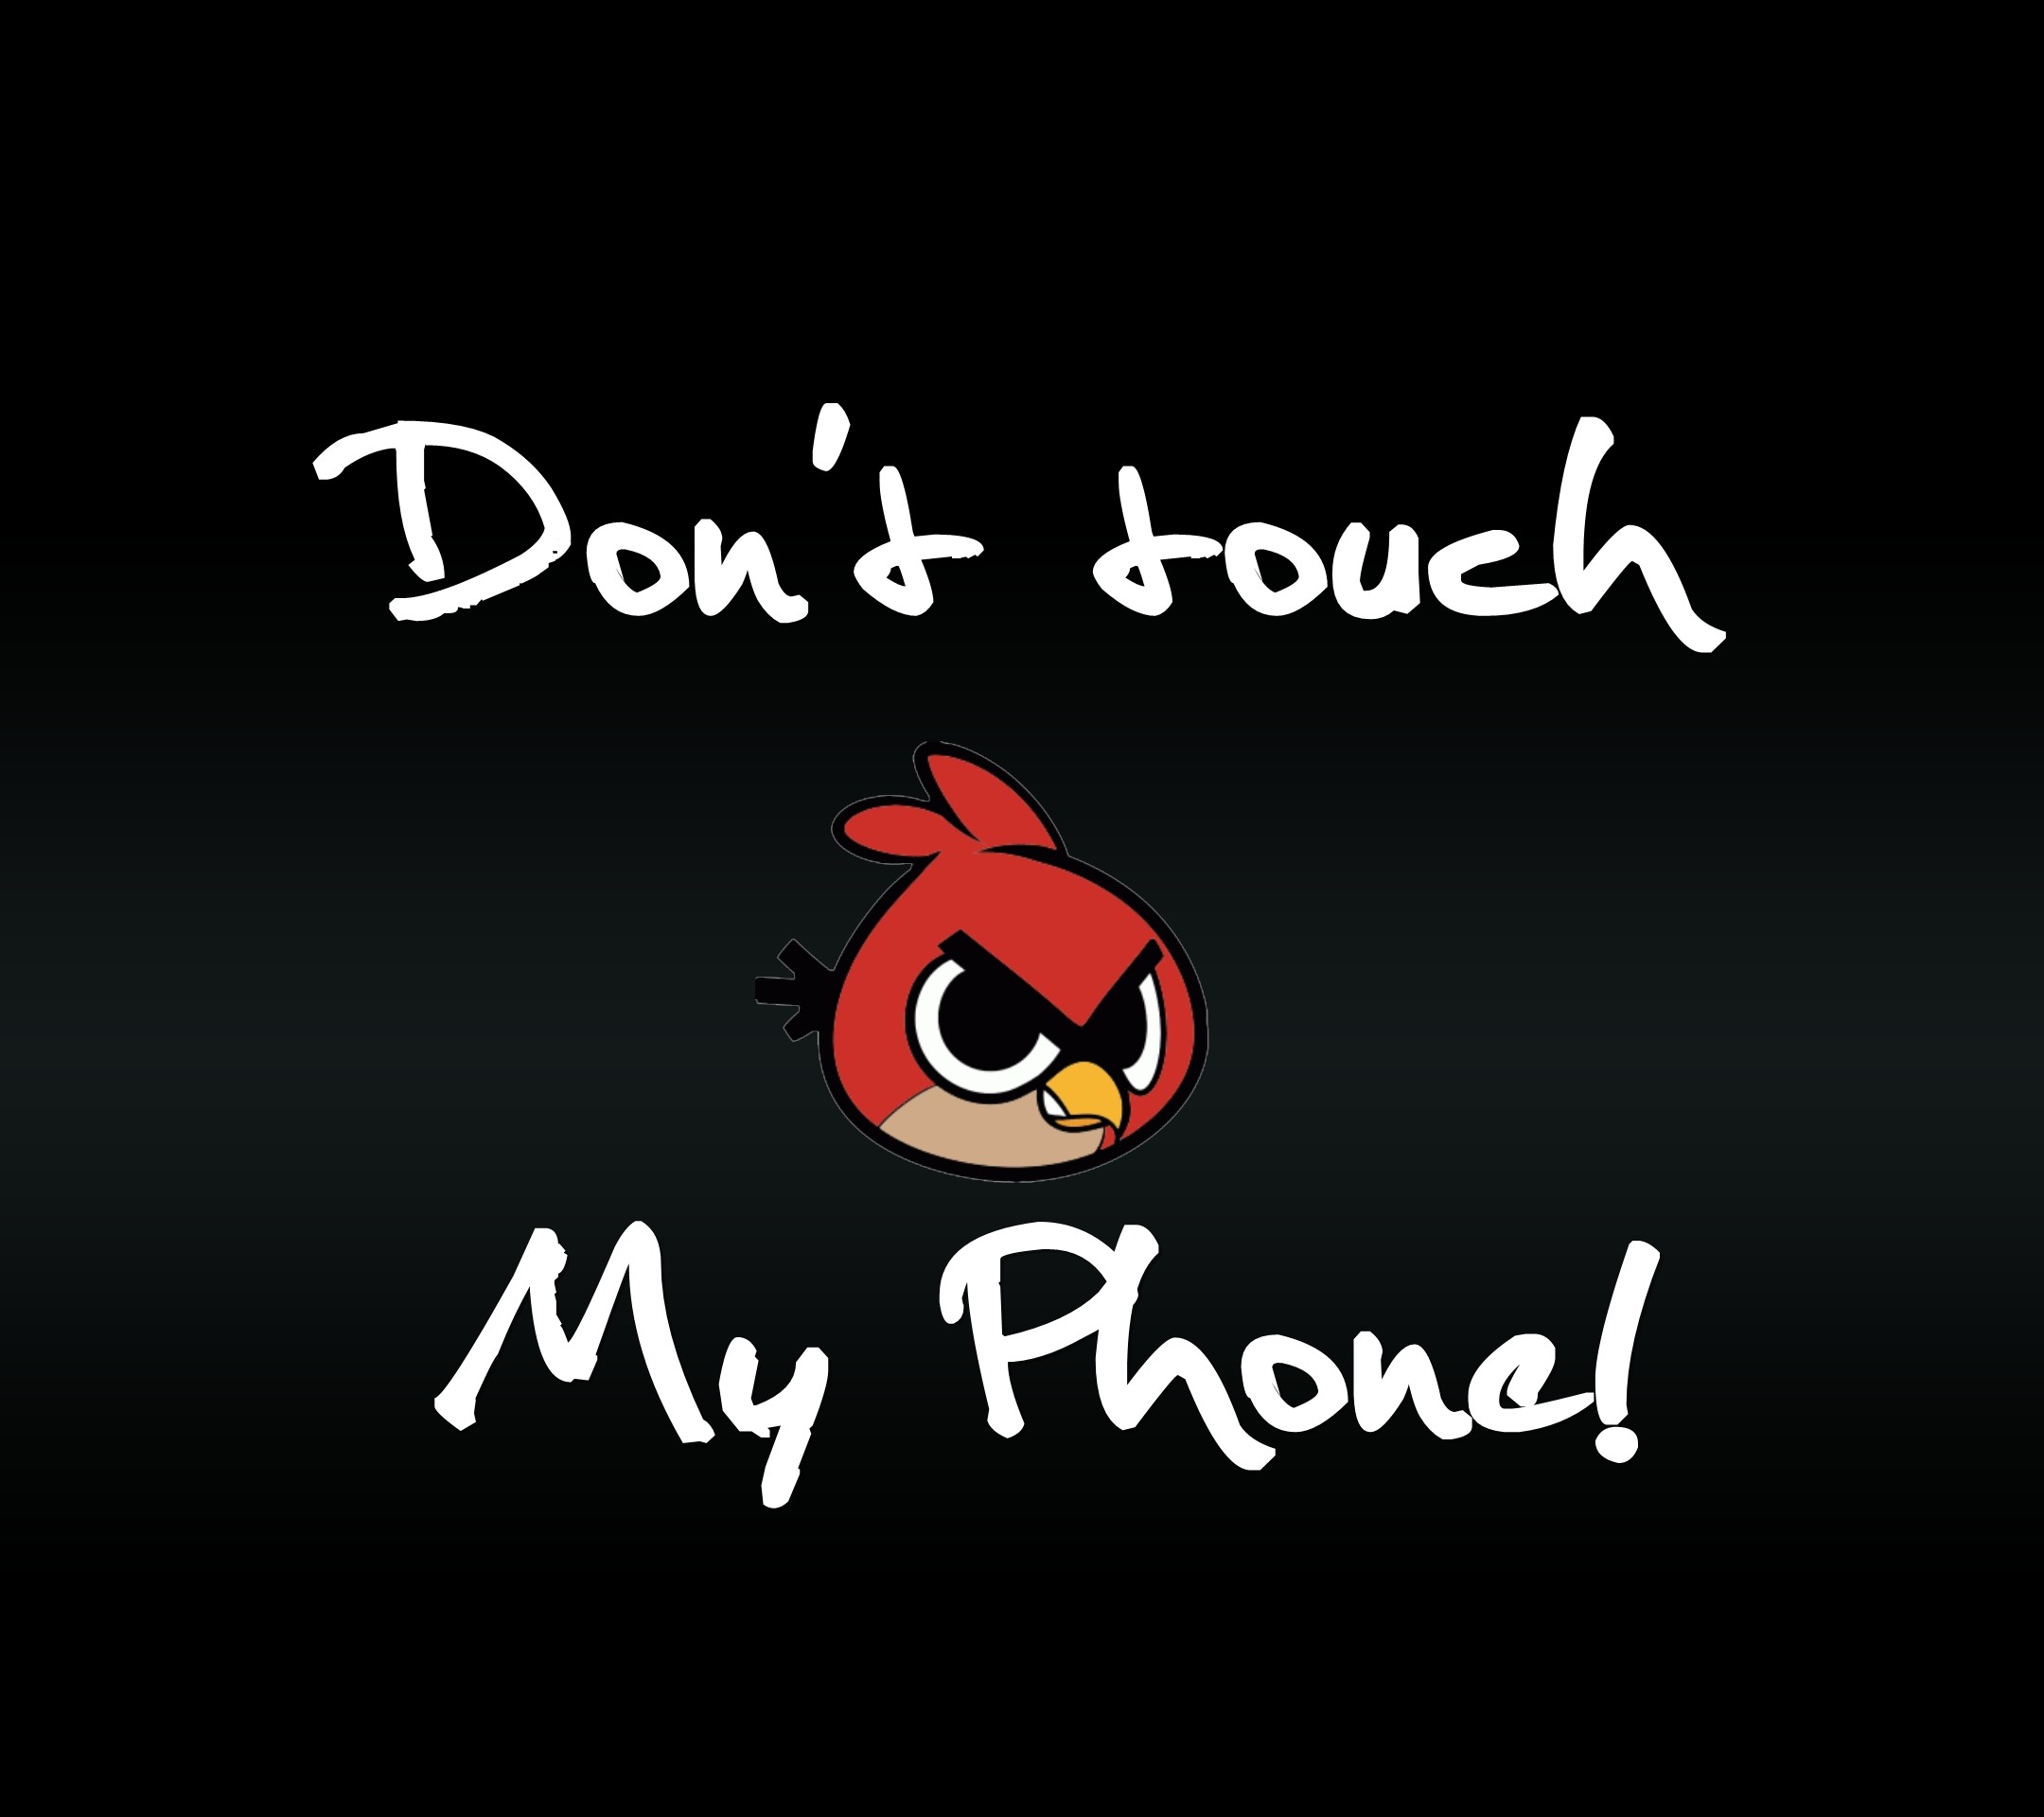 Tap to see more Don't Touch My Phone Android wallpapers, backgrounds, fondos